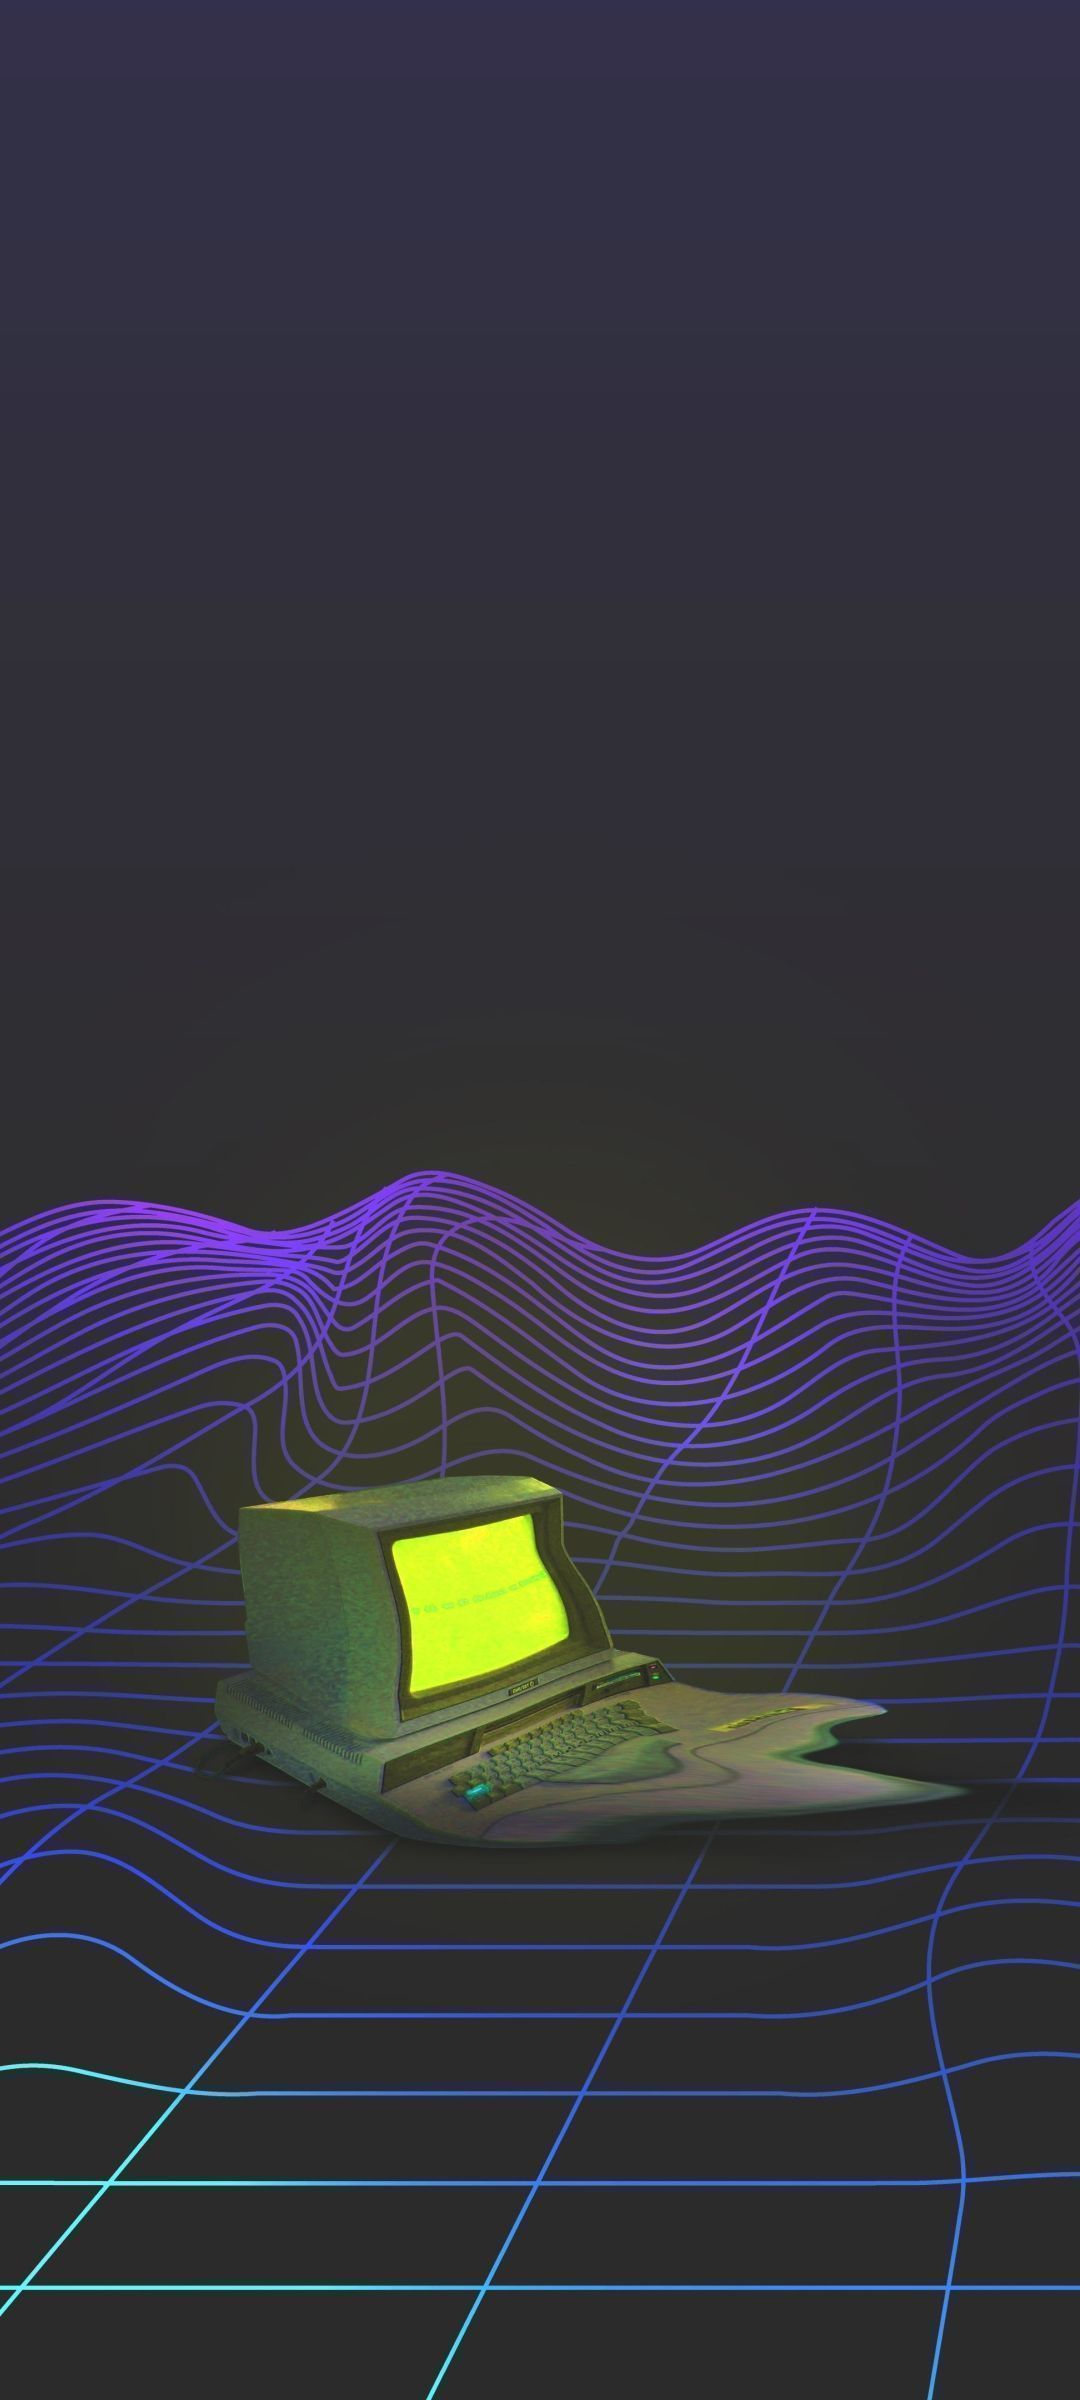 Retro aesthetic phone wallpaper of a neon green glowing laptop - 1080x2400